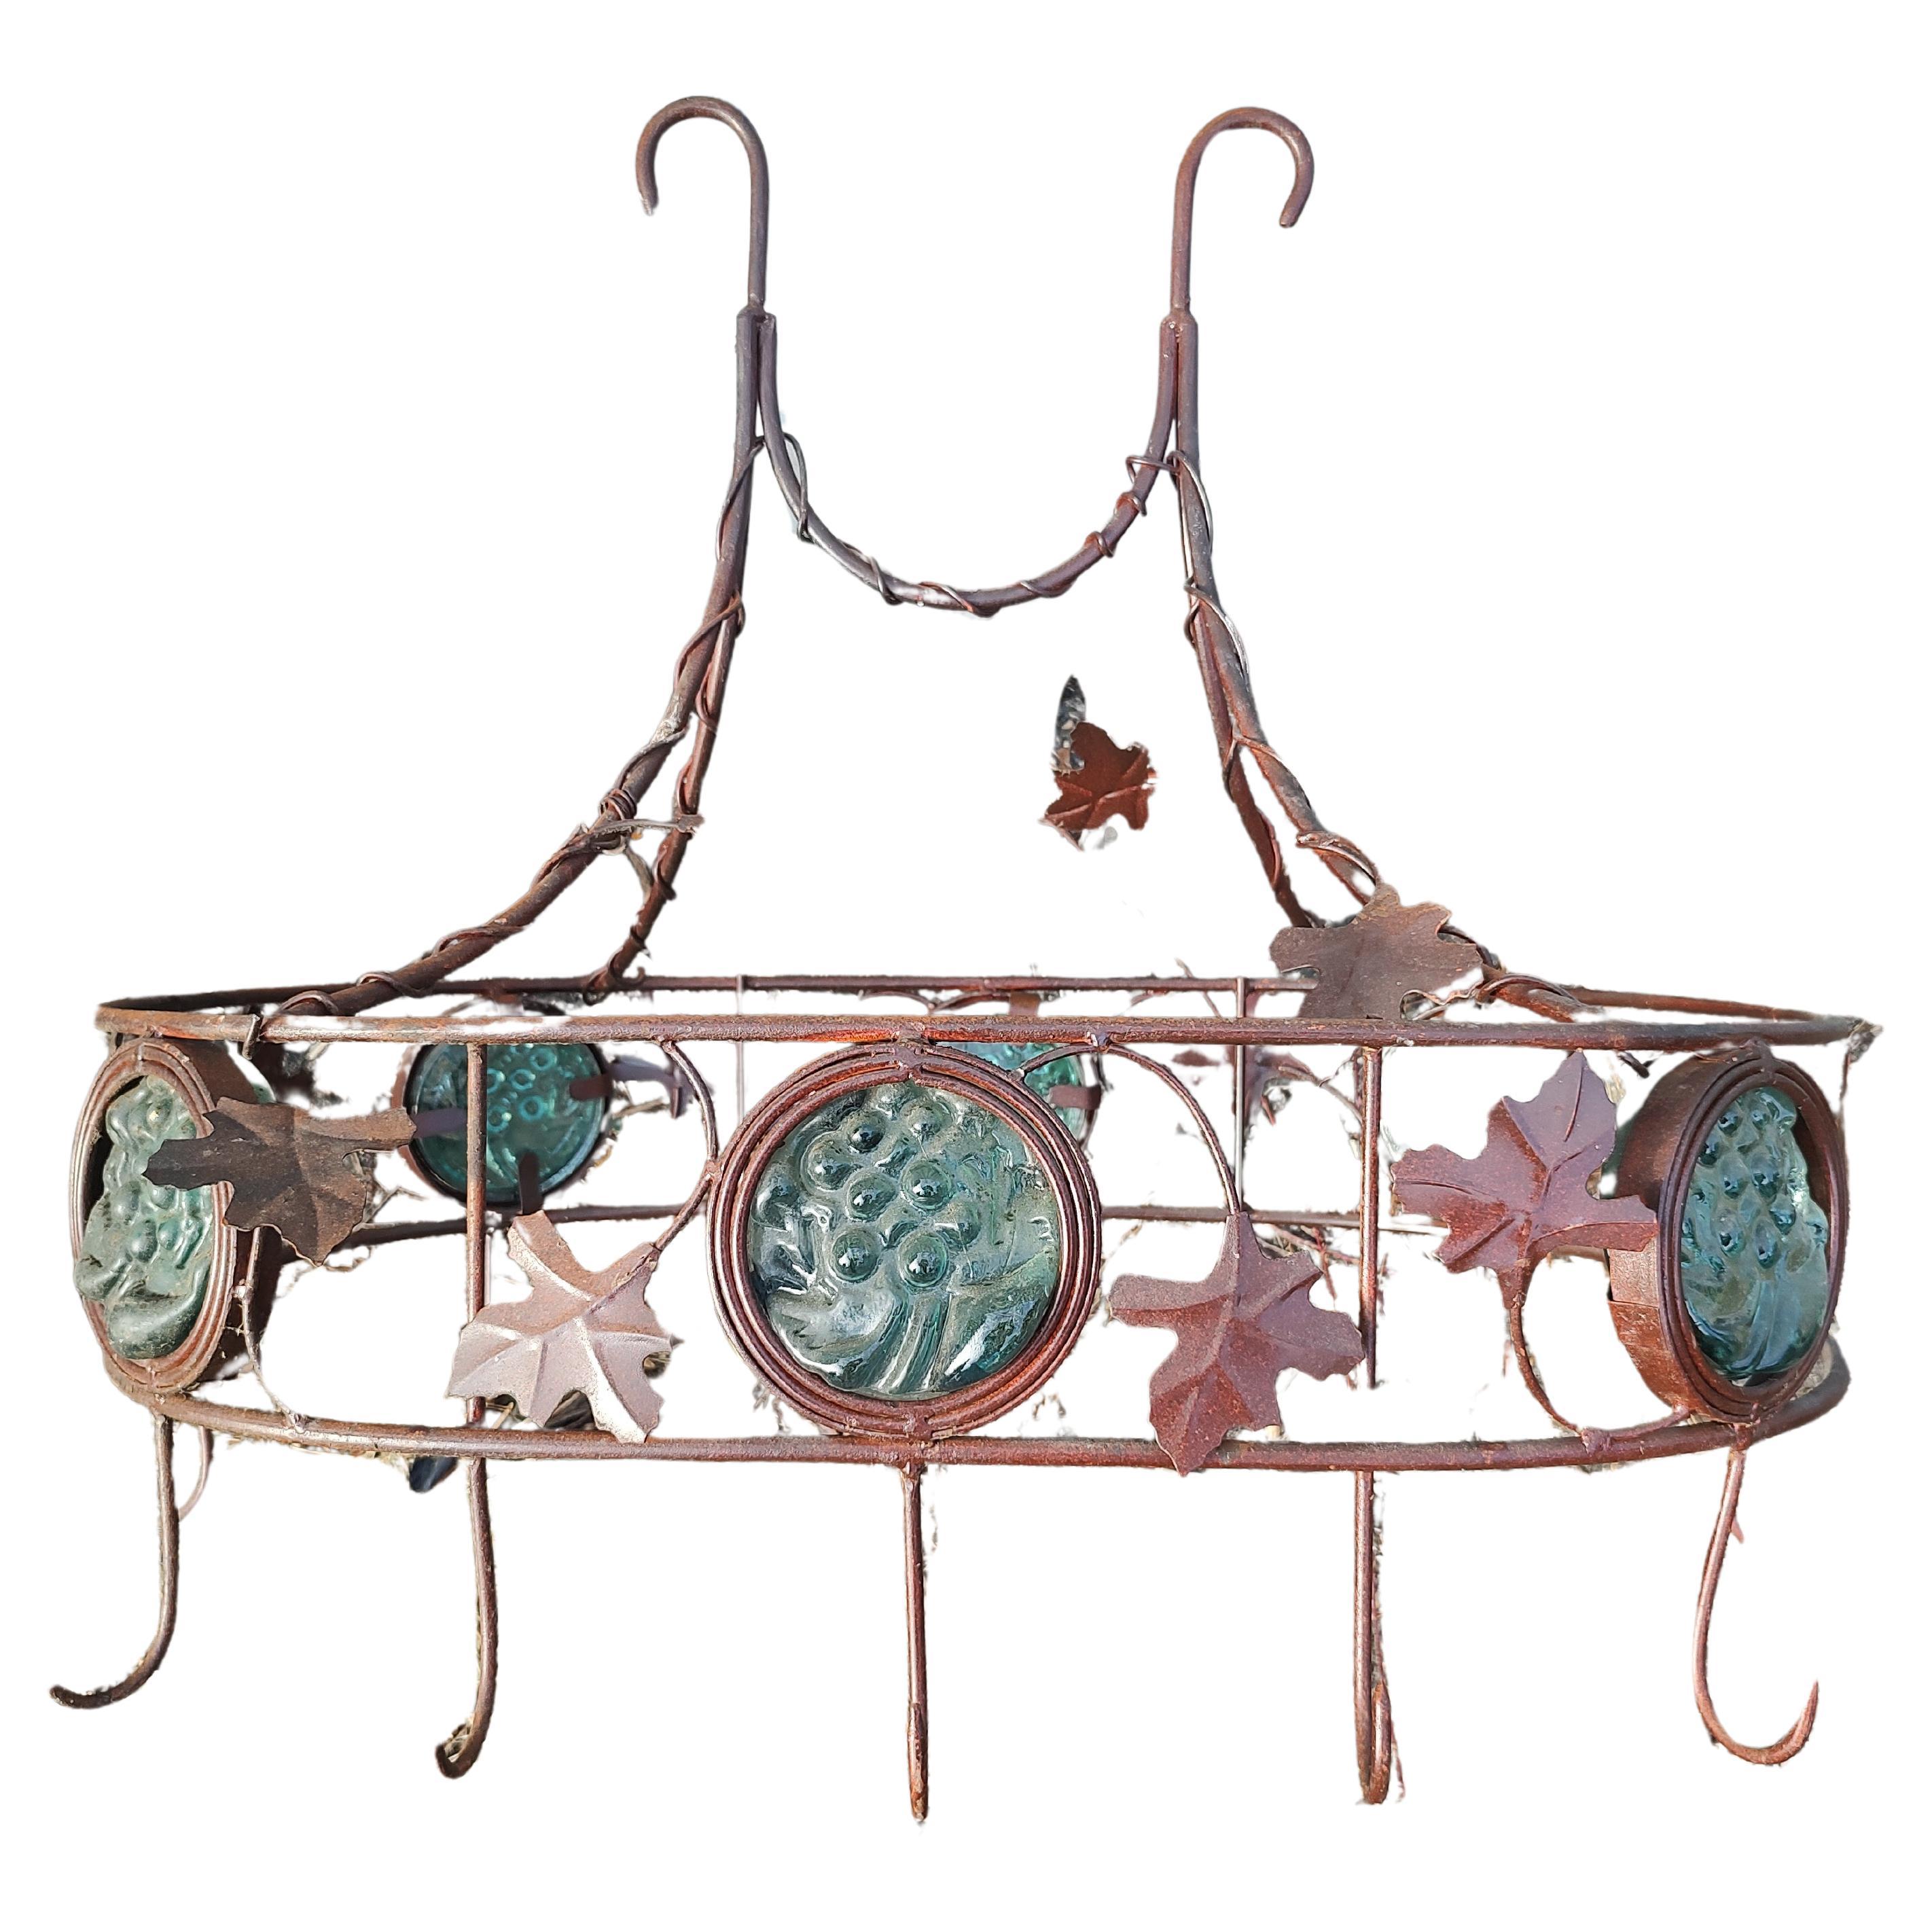 Wrought Iron with Decorative Stained Glass Panels Hanging Pot Rack For Sale